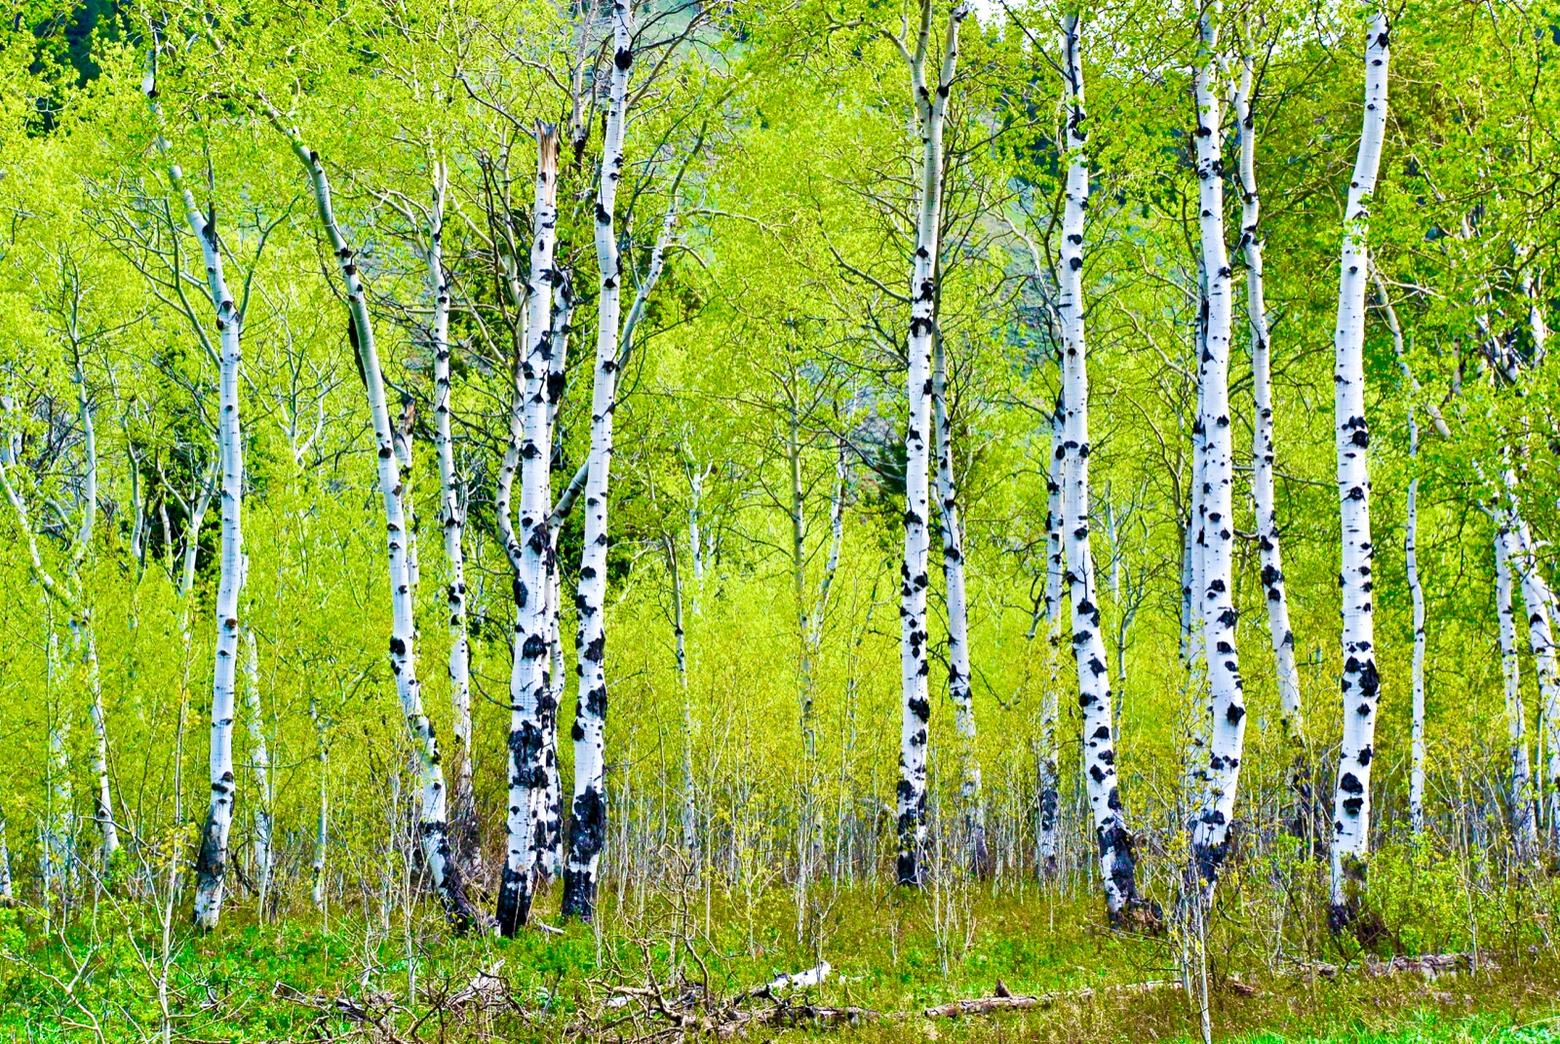 Aspen "groves" are actually expressions of a single mother tree and shared underground system. No matter where you go, how much do you remember about the particulars of place and what reverence do you hold for the other entities that call it "home"? Photo courtesy Susan Marsh